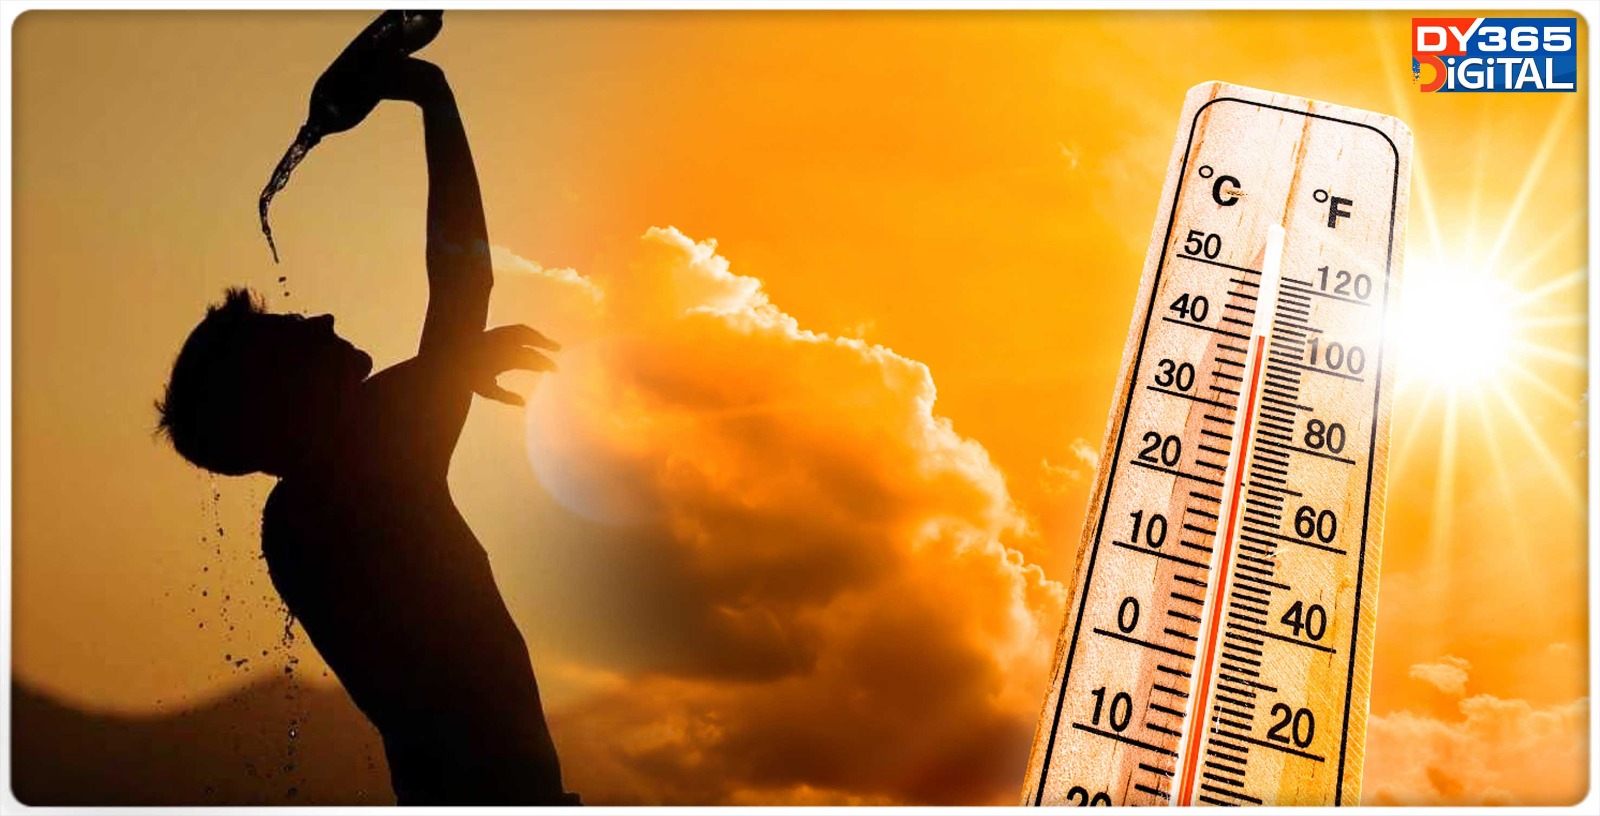 imd-issues-heatwave-alert-for-parts-of-southern-eastern-india-for-next-2-days